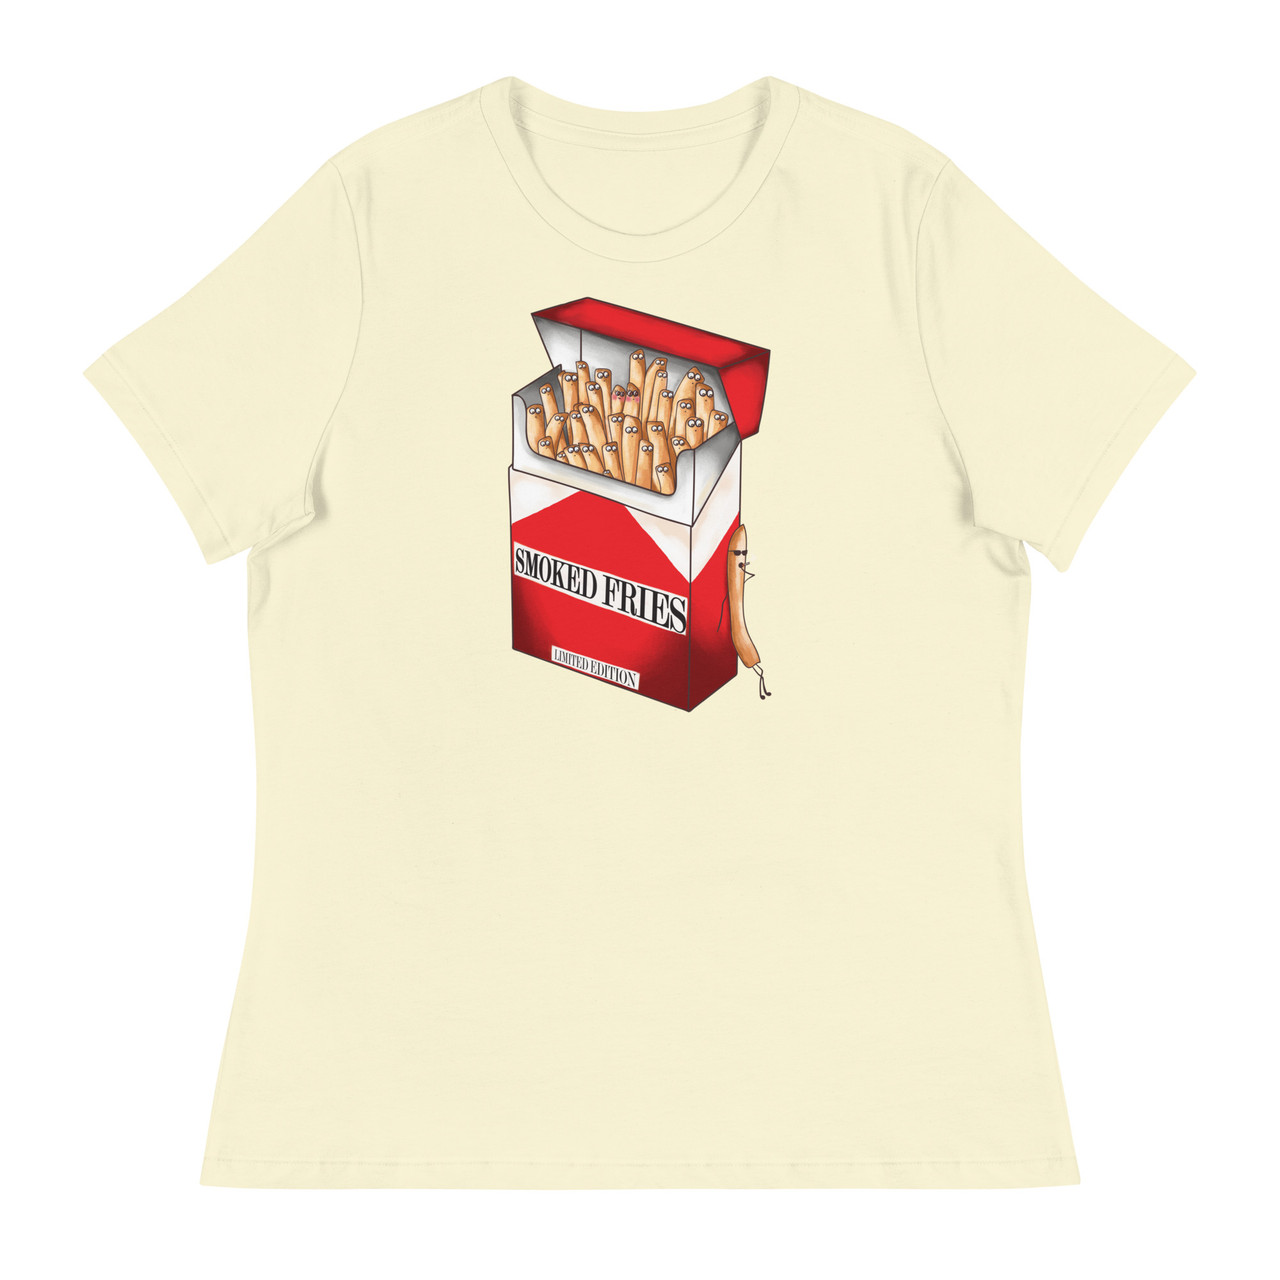 Smoked Fries Women's Relaxed T-Shirt - Bella + Canvas 6400 